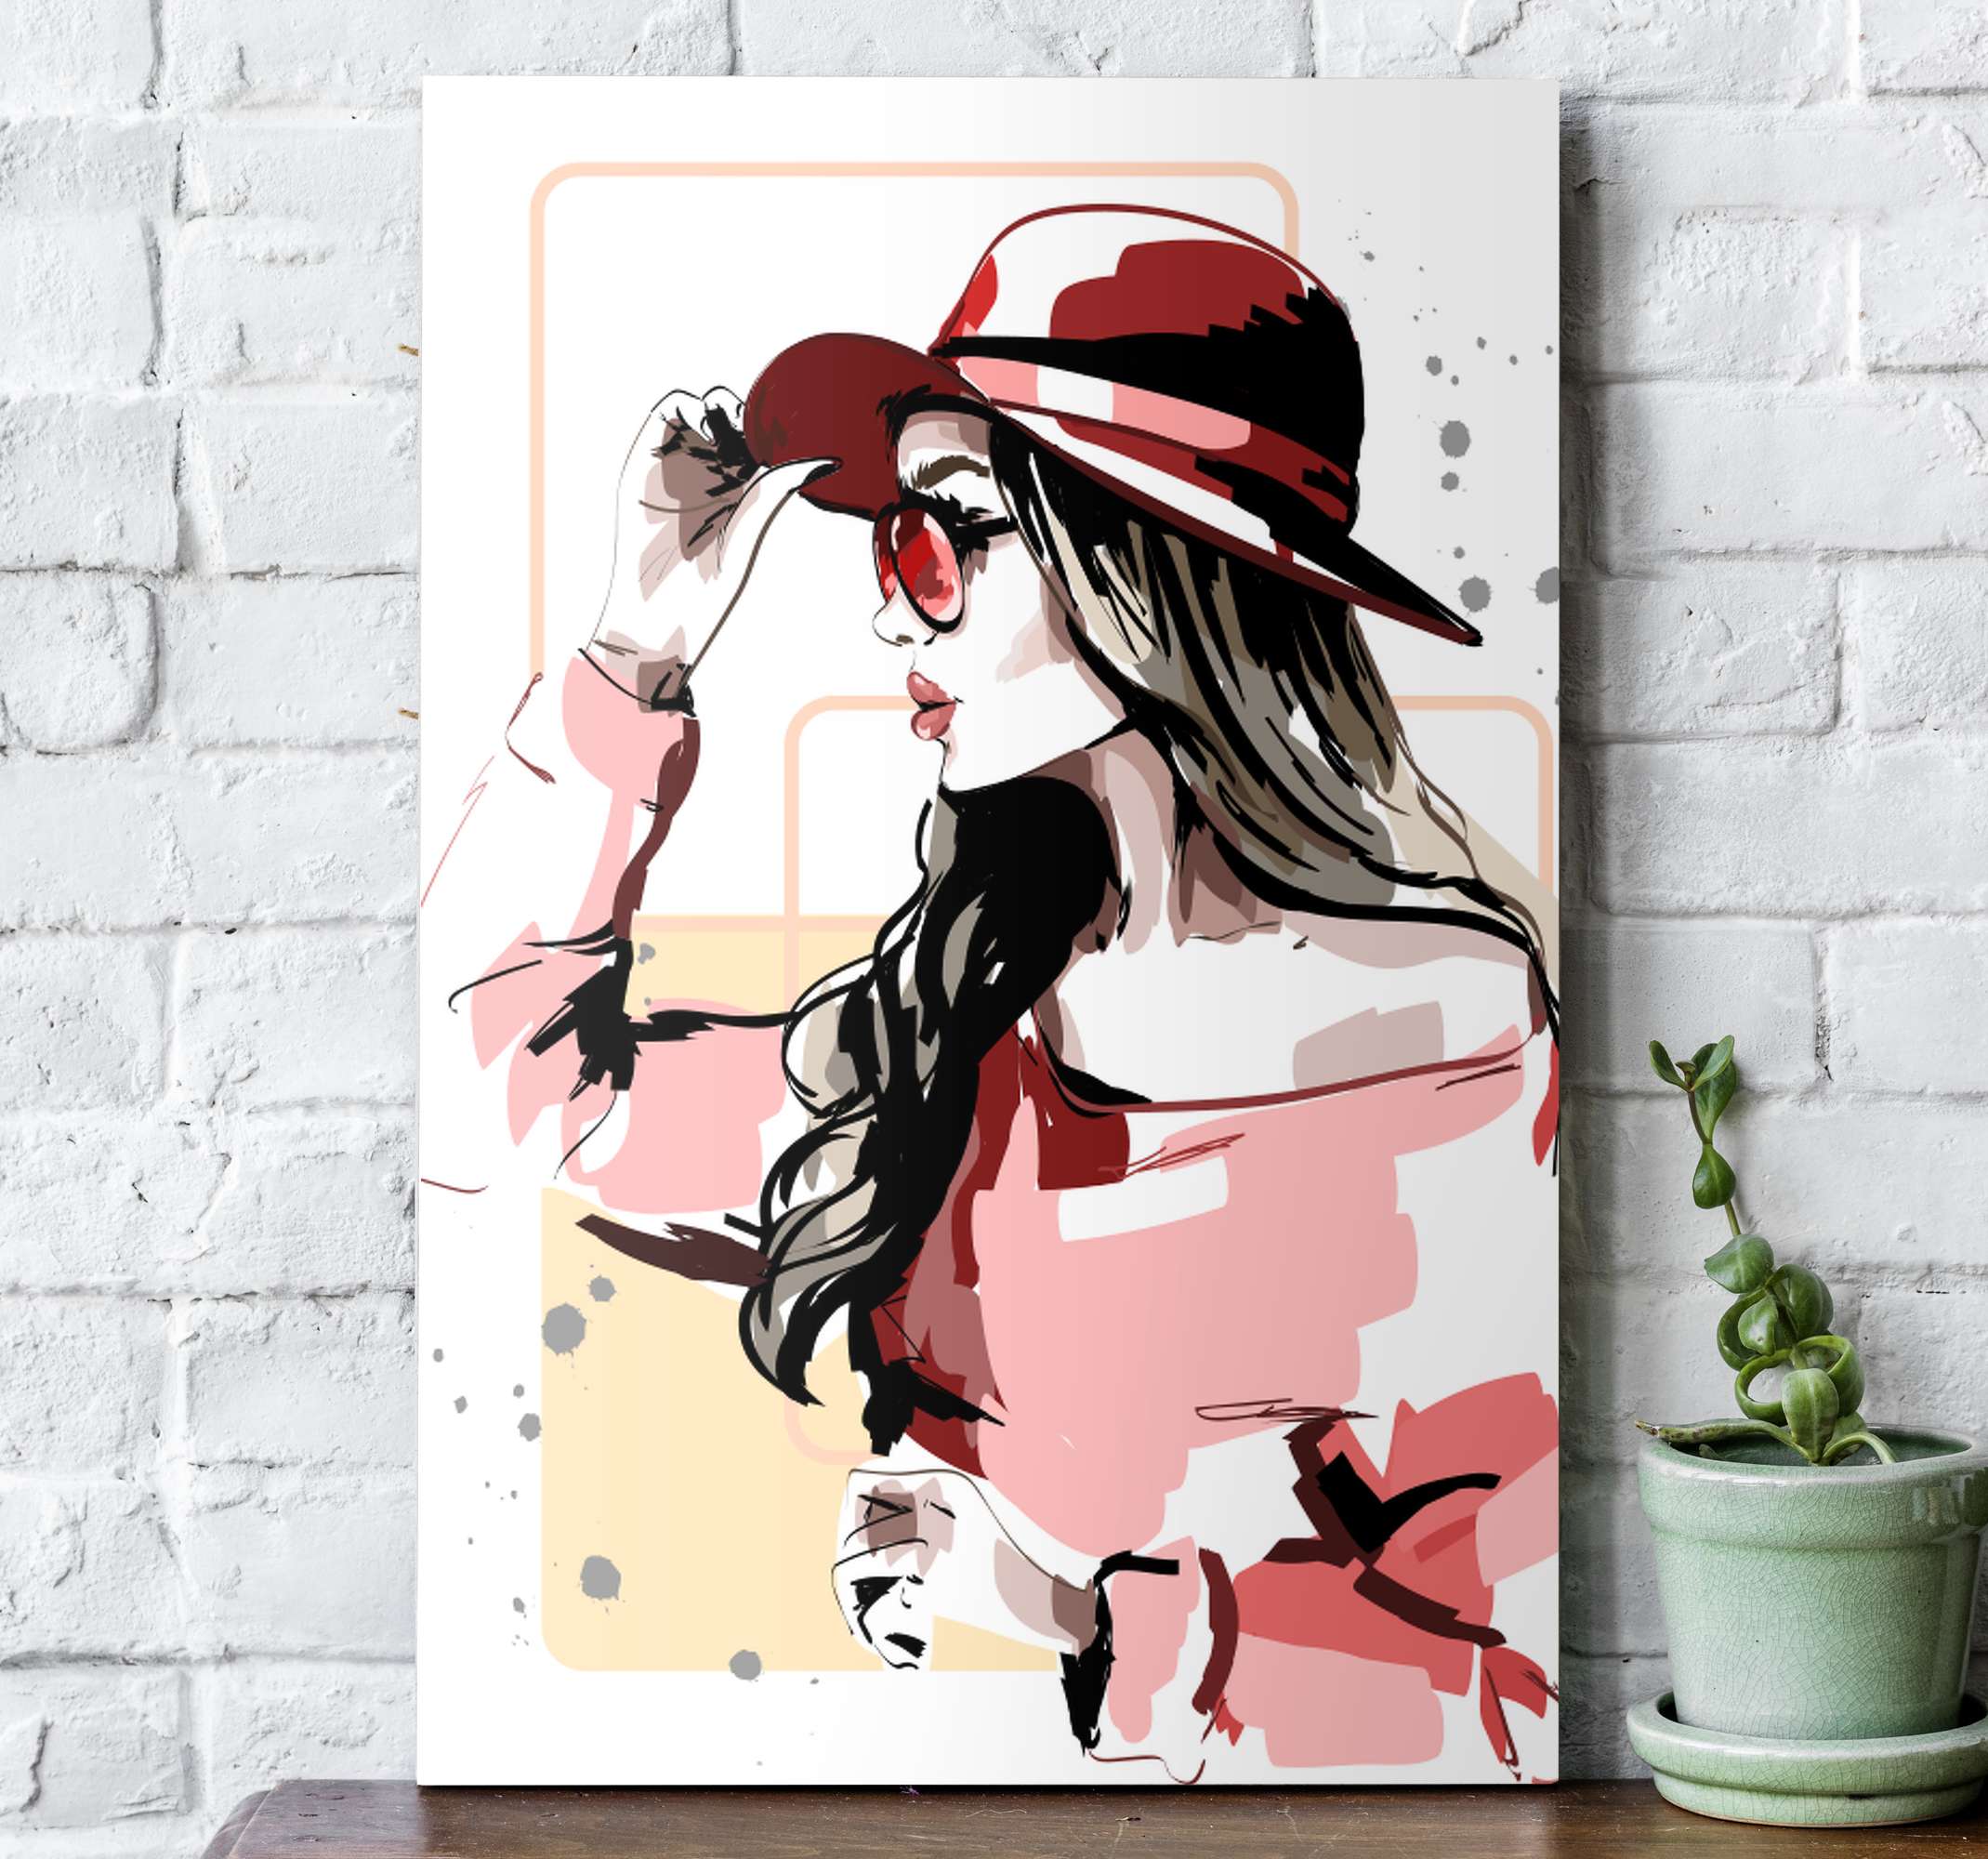 Watercolor musical instruments canvas wall art - TenStickers